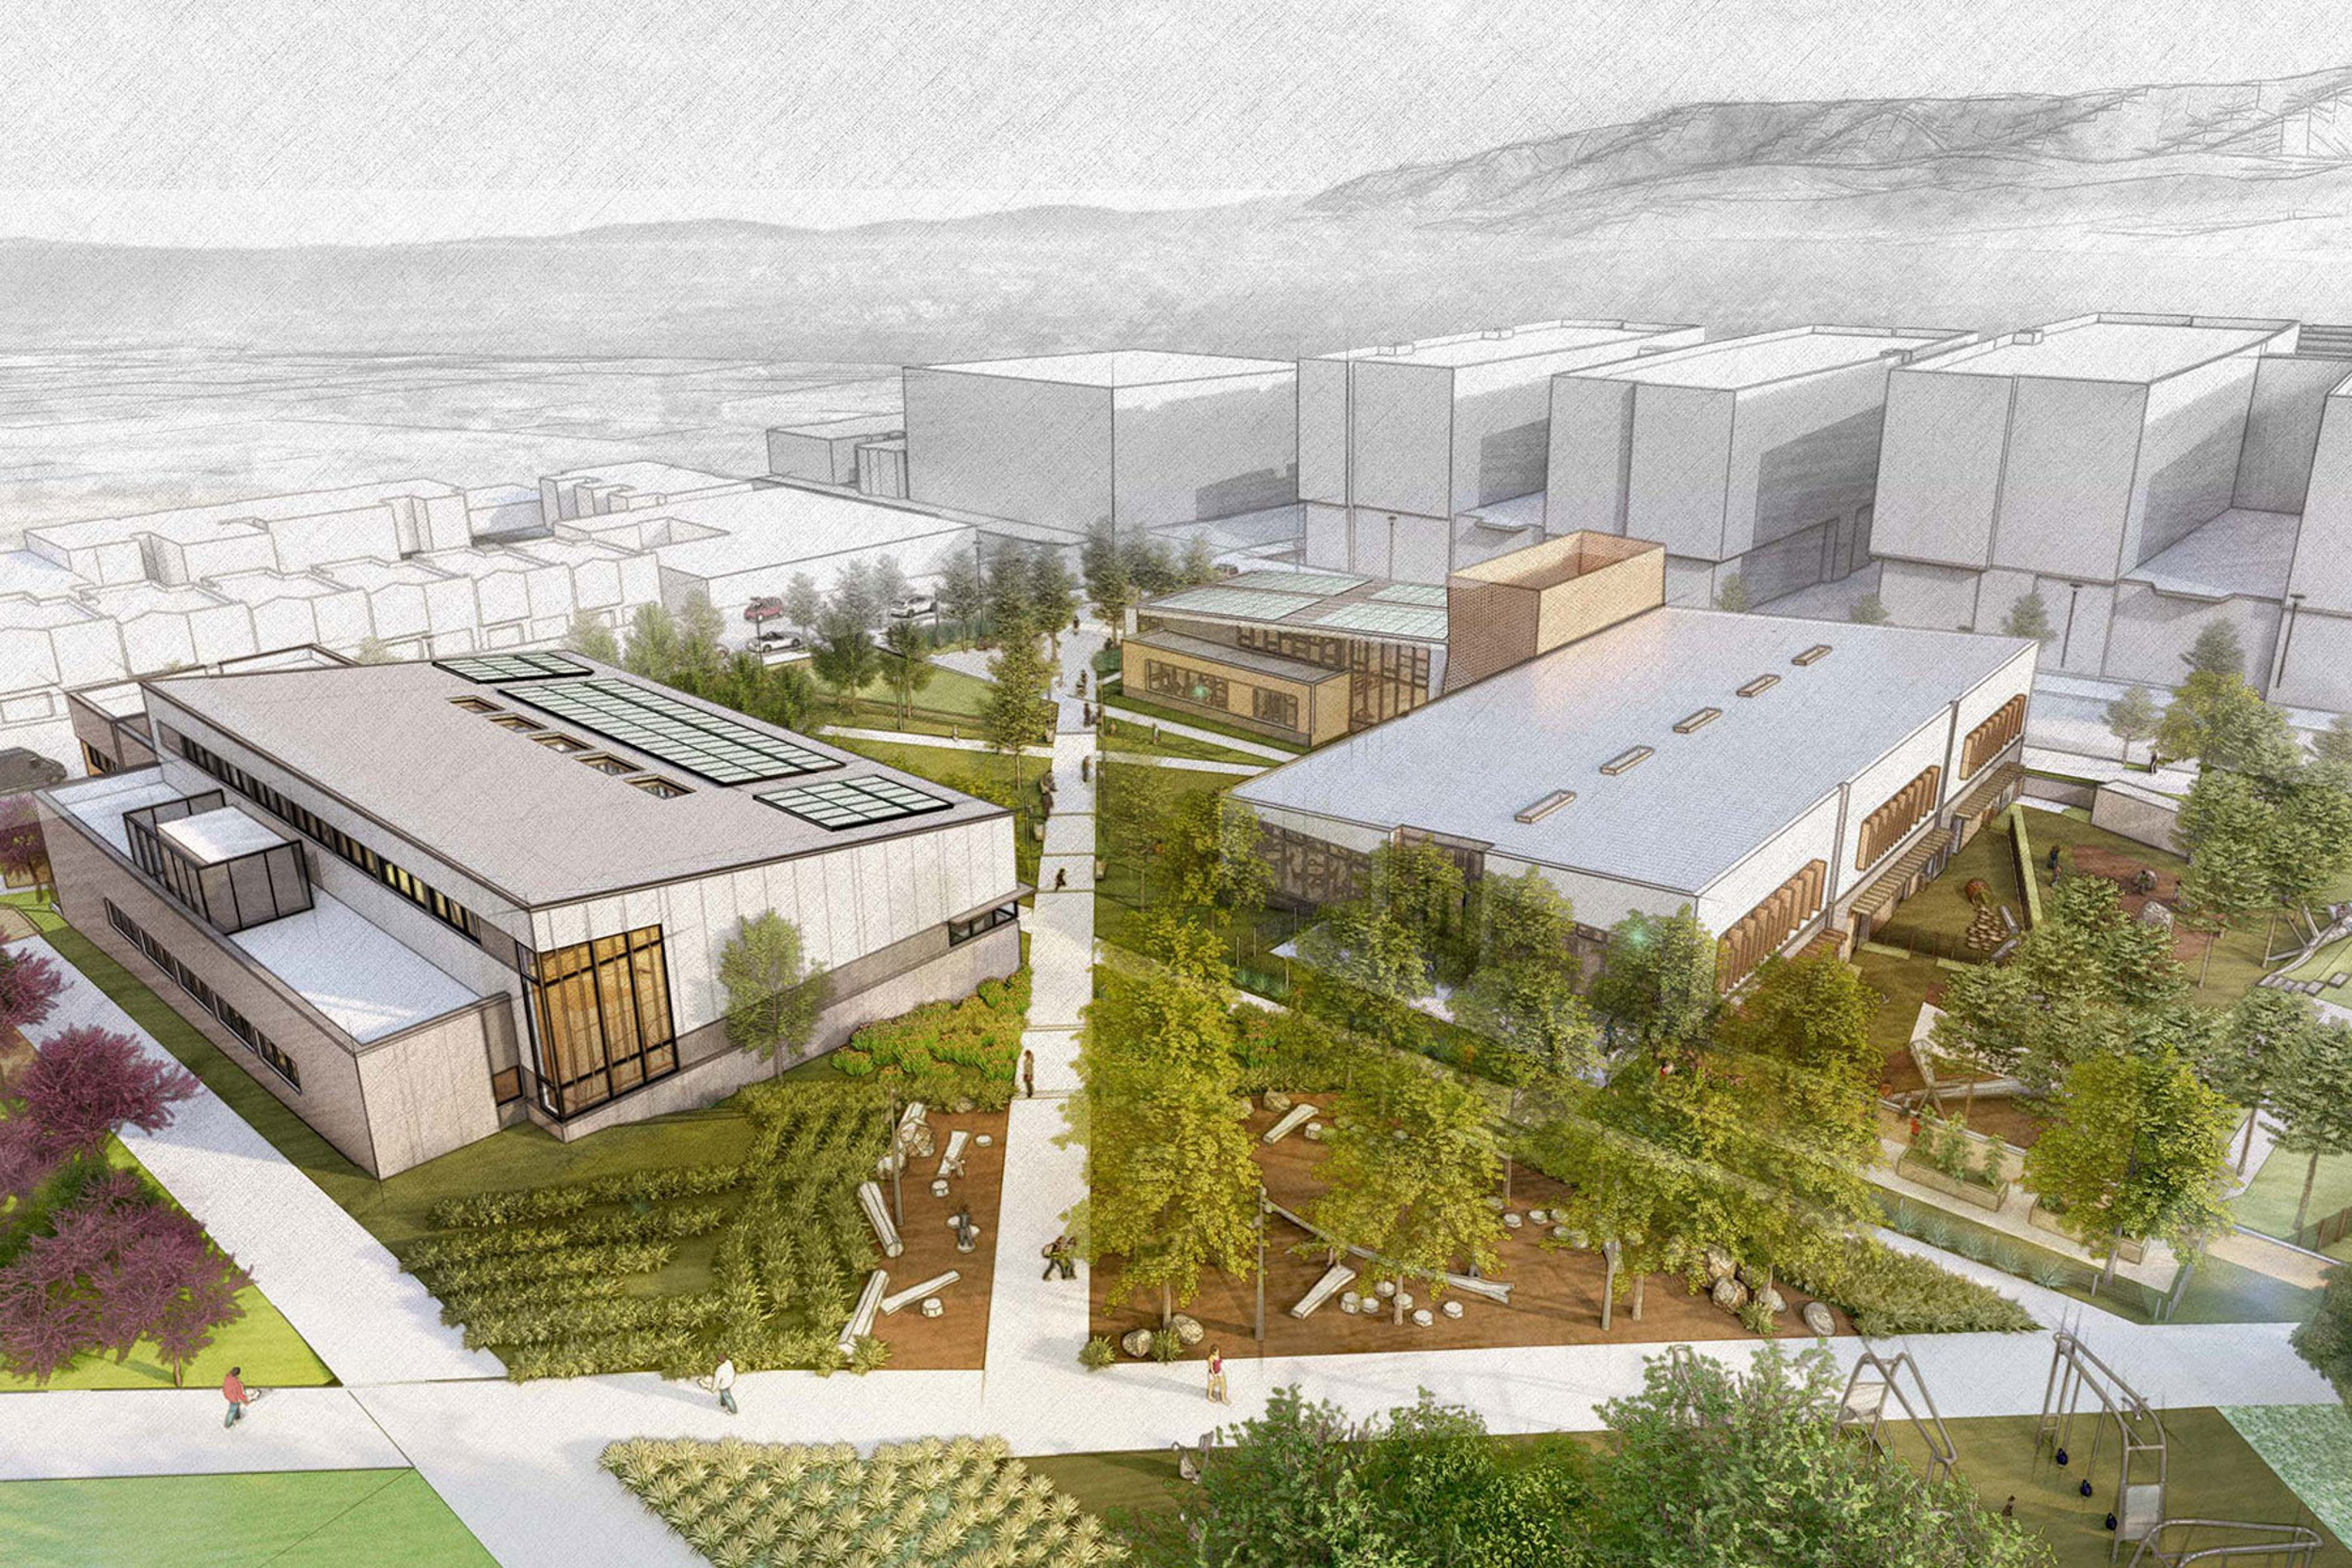 Sunnydale Community Center view looking towards the Sunnydale development, rendering by LMS Architects